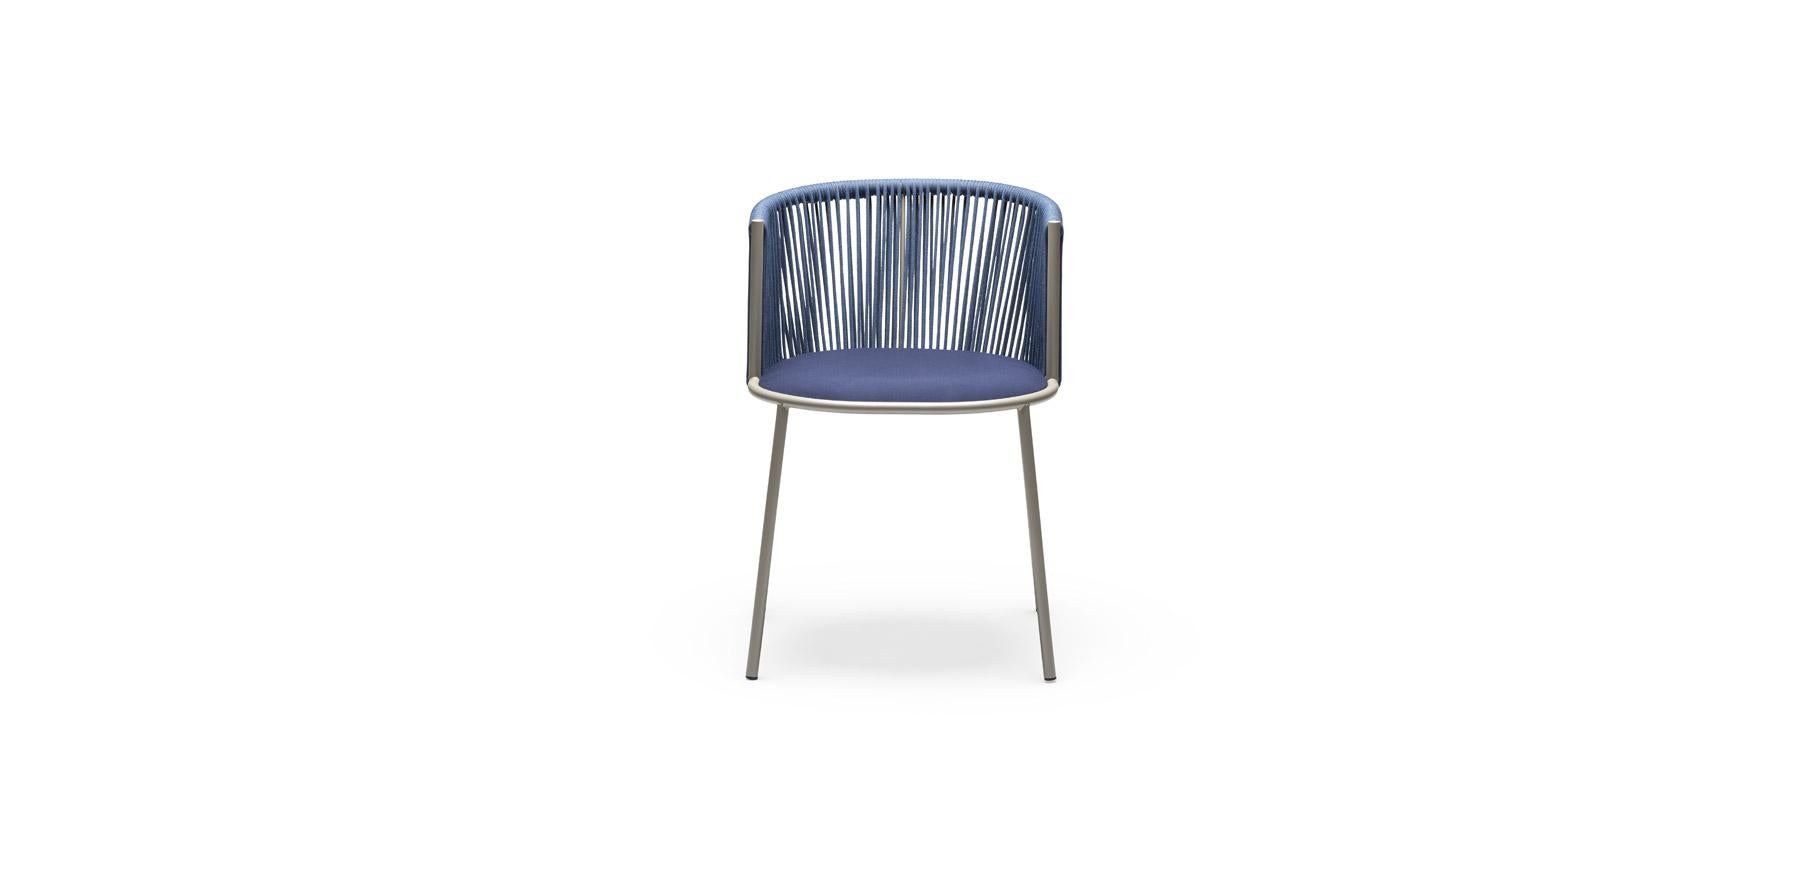 Powder-coated metal frame in anthracite for outdoor use 
Handmade woven back with marine rope. 
Upholstered seat in midnight blue fabric for outdoor use.
Dimensions:
Width: 53 cm - 21 in
Height: 76 cm - 30 in
Seat height: 49 cm - 19 in
Armrest